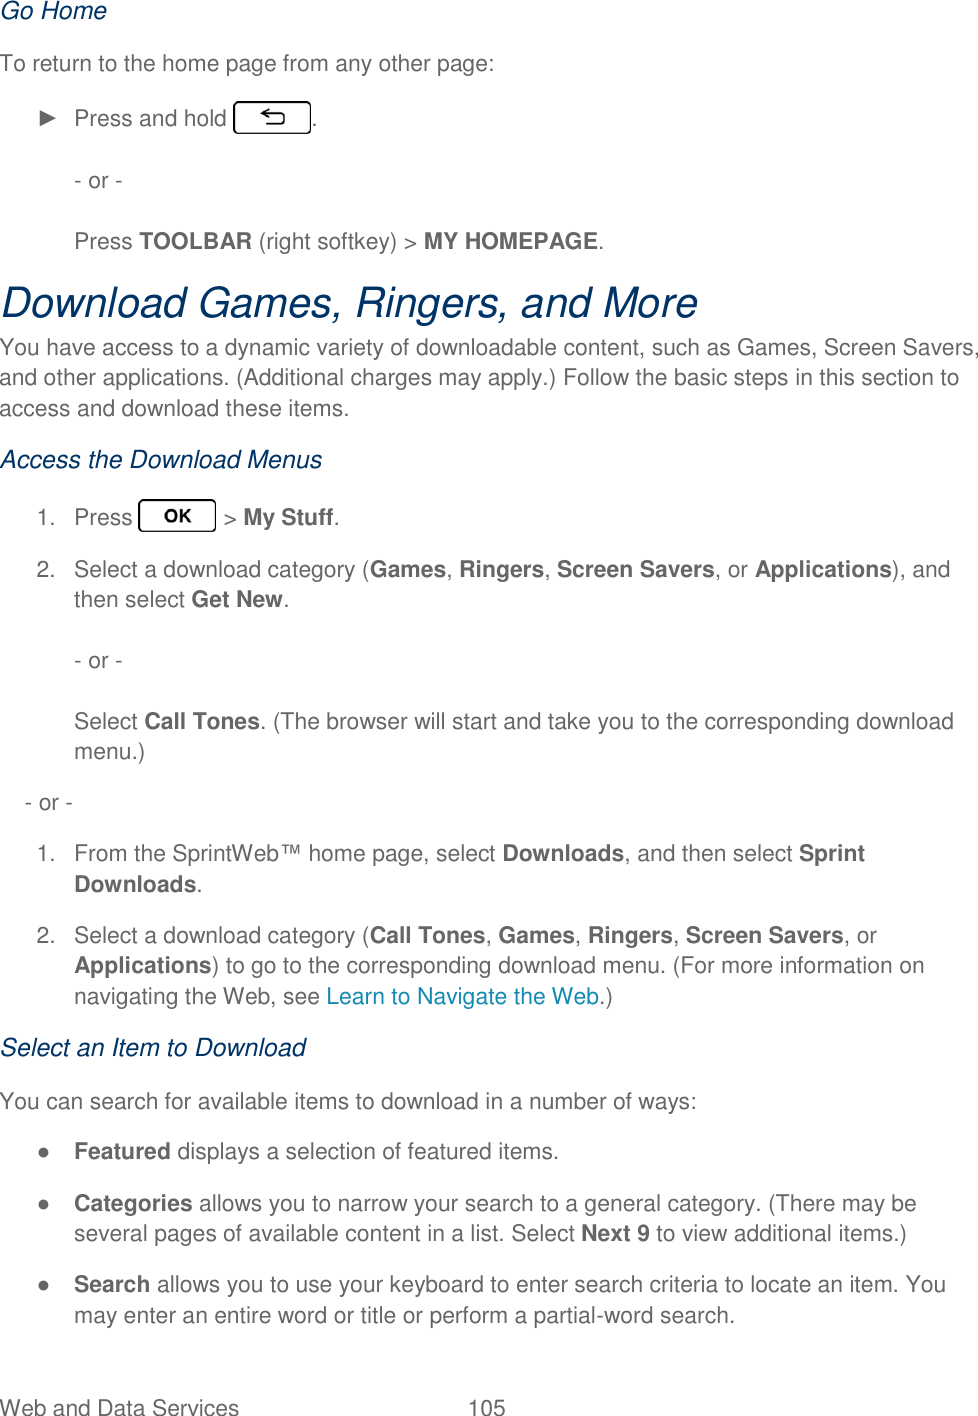 Web and Data Services  105   Go Home To return to the home page from any other page: ►  Press and hold  .  - or -  Press TOOLBAR (right softkey) &gt; MY HOMEPAGE. Download Games, Ringers, and More  You have access to a dynamic variety of downloadable content, such as Games, Screen Savers, and other applications. (Additional charges may apply.) Follow the basic steps in this section to access and download these items. Access the Download Menus 1.  Press   &gt; My Stuff. 2.  Select a download category (Games, Ringers, Screen Savers, or Applications), and then select Get New.   - or -  Select Call Tones. (The browser will start and take you to the corresponding download menu.)     - or - 1.  From the SprintWeb™ home page, select Downloads, and then select Sprint Downloads. 2.  Select a download category (Call Tones, Games, Ringers, Screen Savers, or Applications) to go to the corresponding download menu. (For more information on navigating the Web, see Learn to Navigate the Web.) Select an Item to Download You can search for available items to download in a number of ways: ● Featured displays a selection of featured items. ● Categories allows you to narrow your search to a general category. (There may be several pages of available content in a list. Select Next 9 to view additional items.) ● Search allows you to use your keyboard to enter search criteria to locate an item. You may enter an entire word or title or perform a partial-word search. 